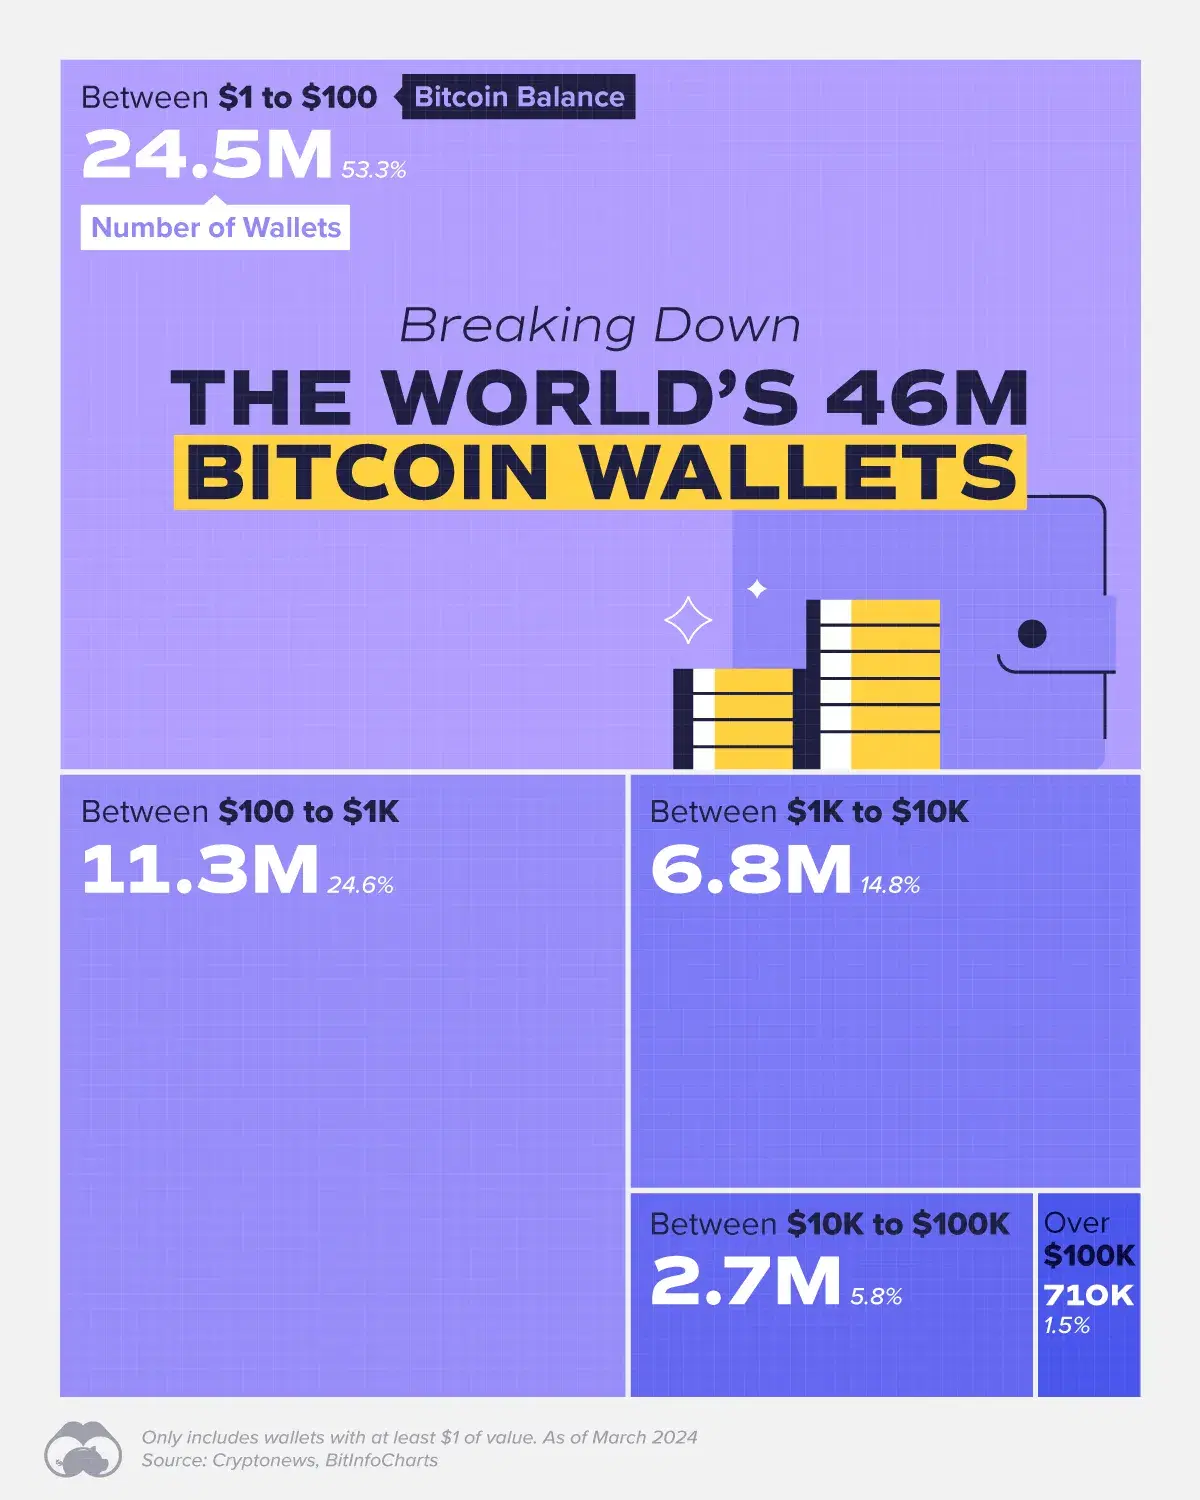 Majority of Bitcoin Wallets are Worth Between $1 to $100